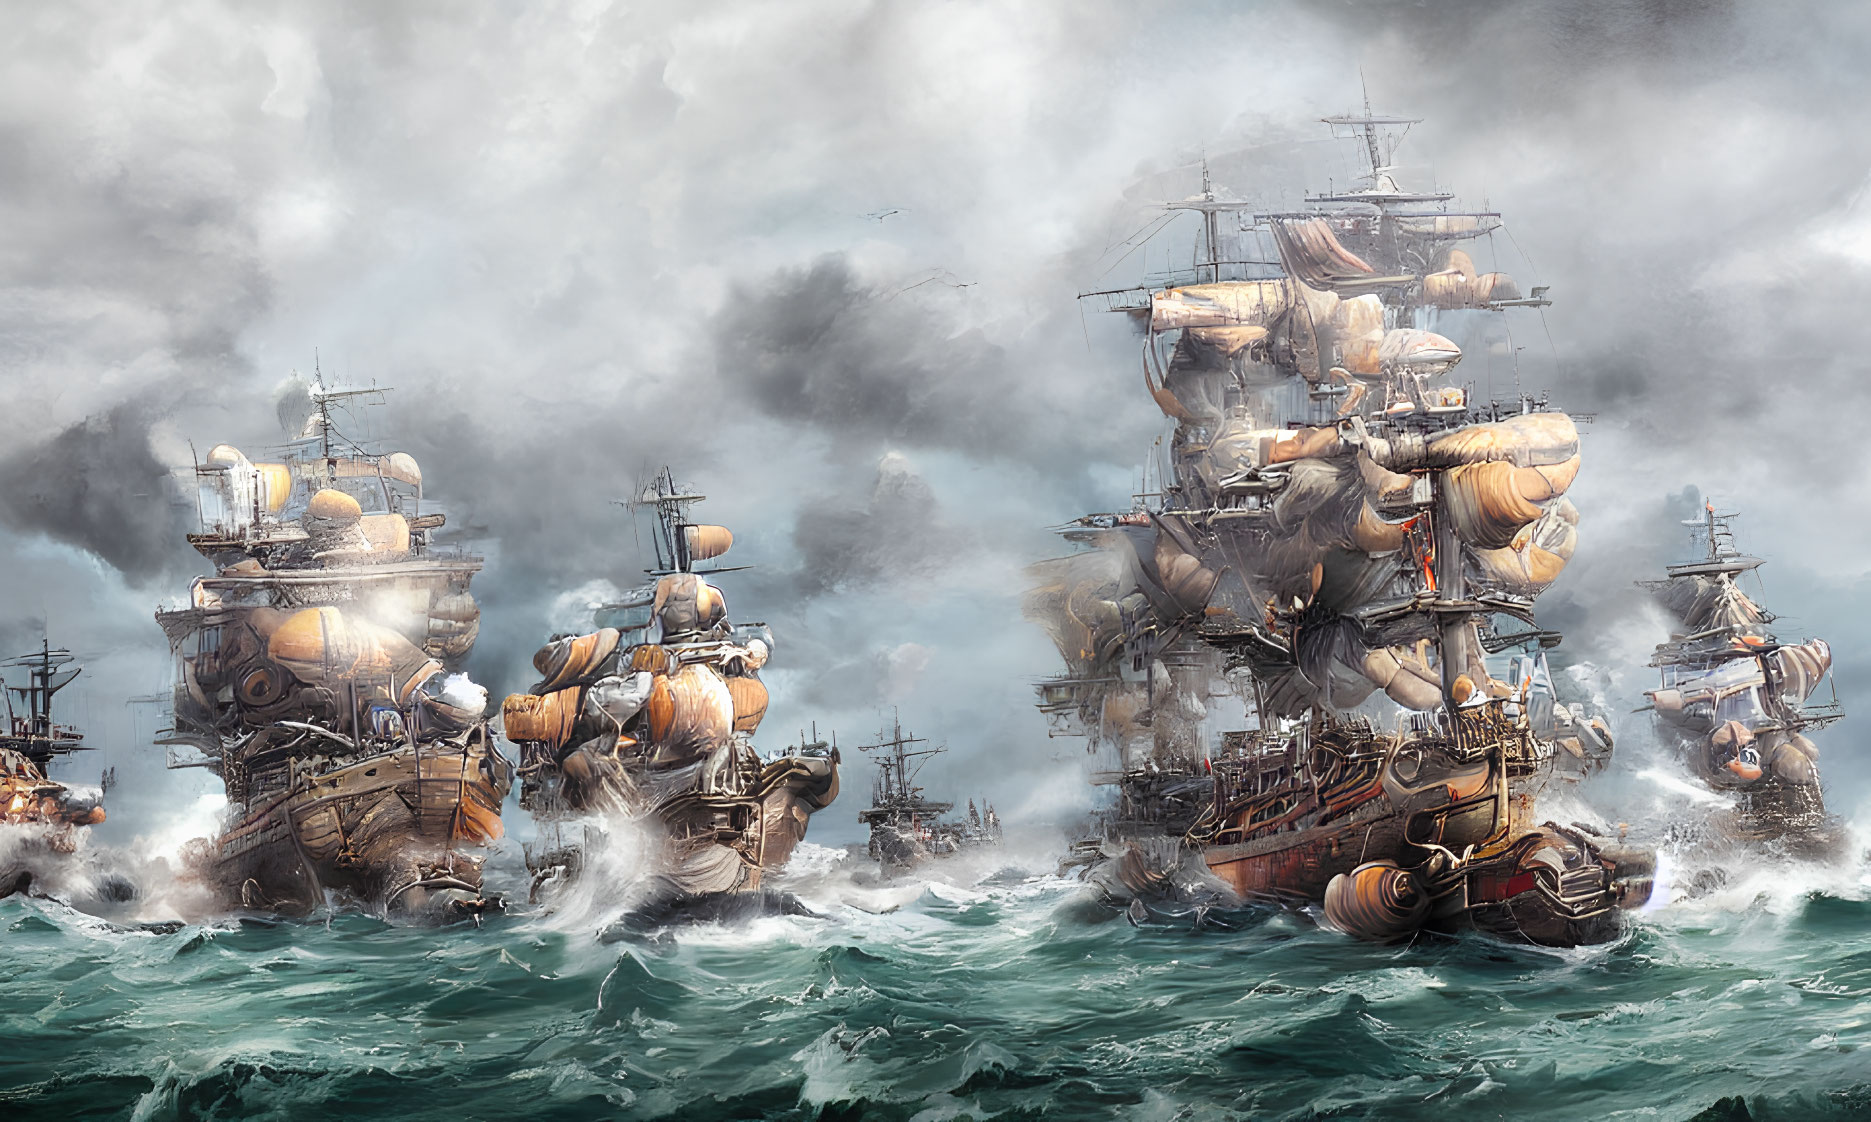 Historic naval battle scene with tall ships in tumultuous seas